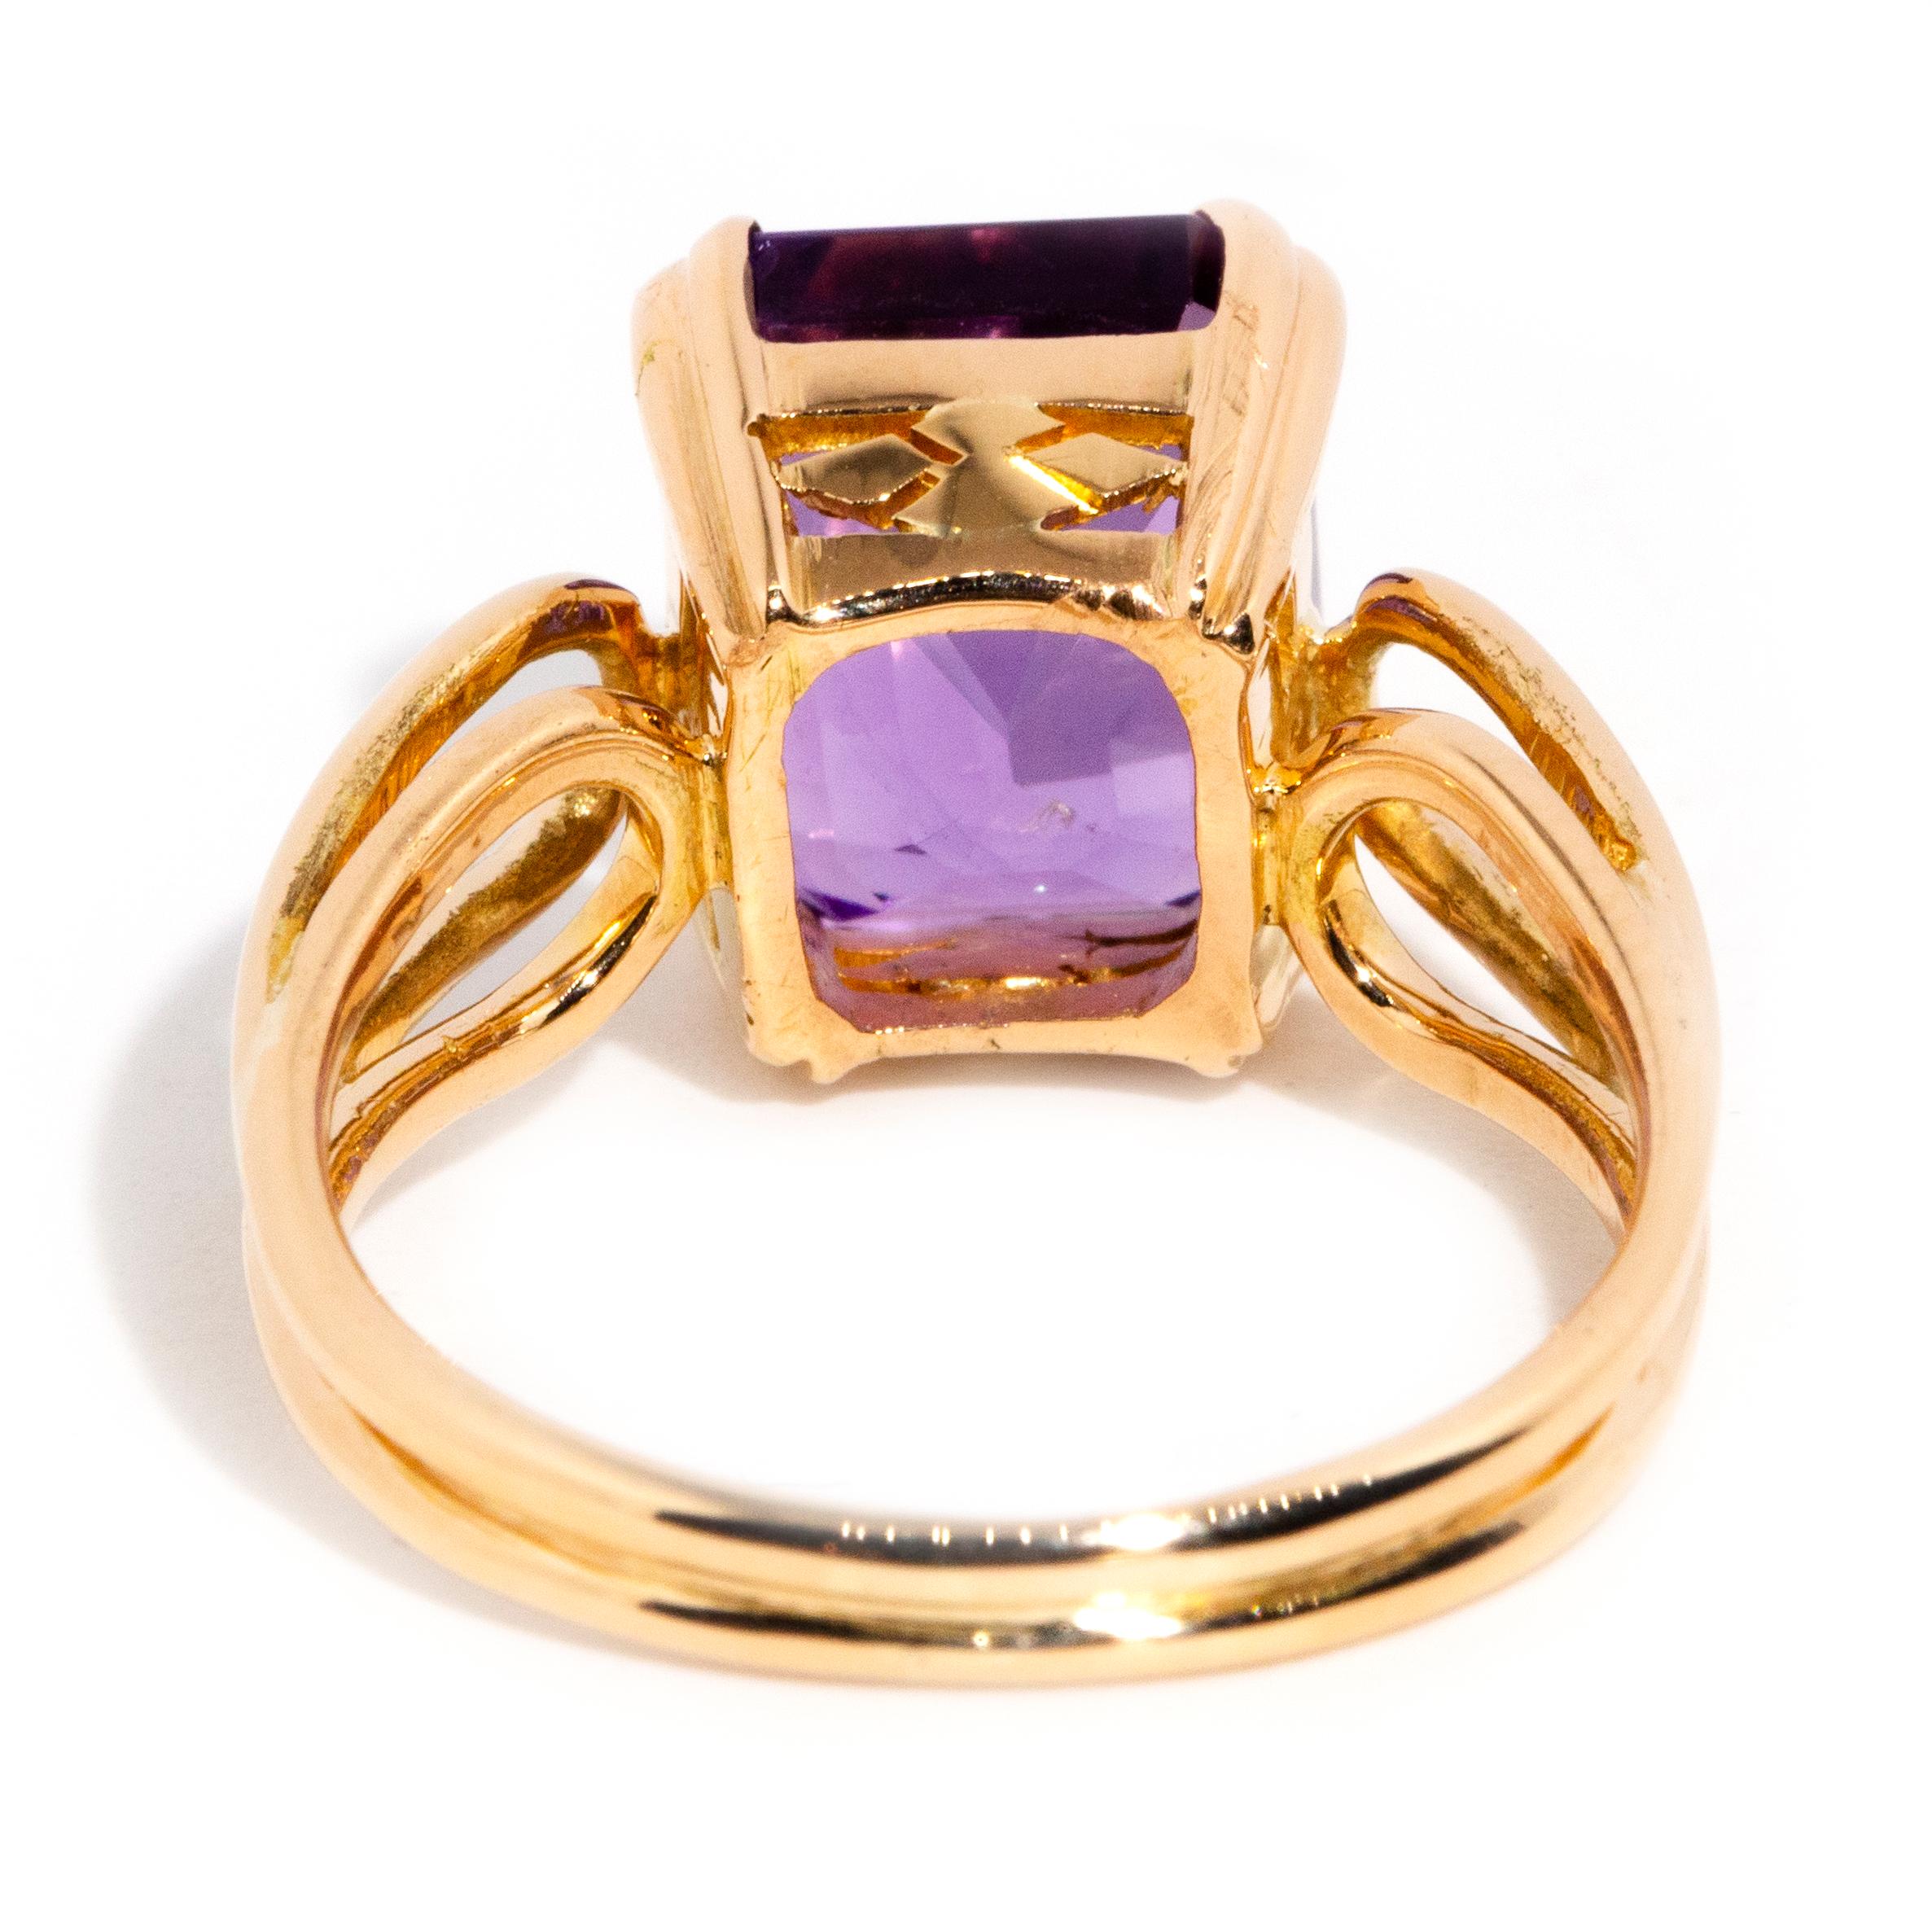 Vintage Circa 1980s 18 Carat Yellow Gold Emerald Cut Bright Purple Amethyst Ring For Sale 4